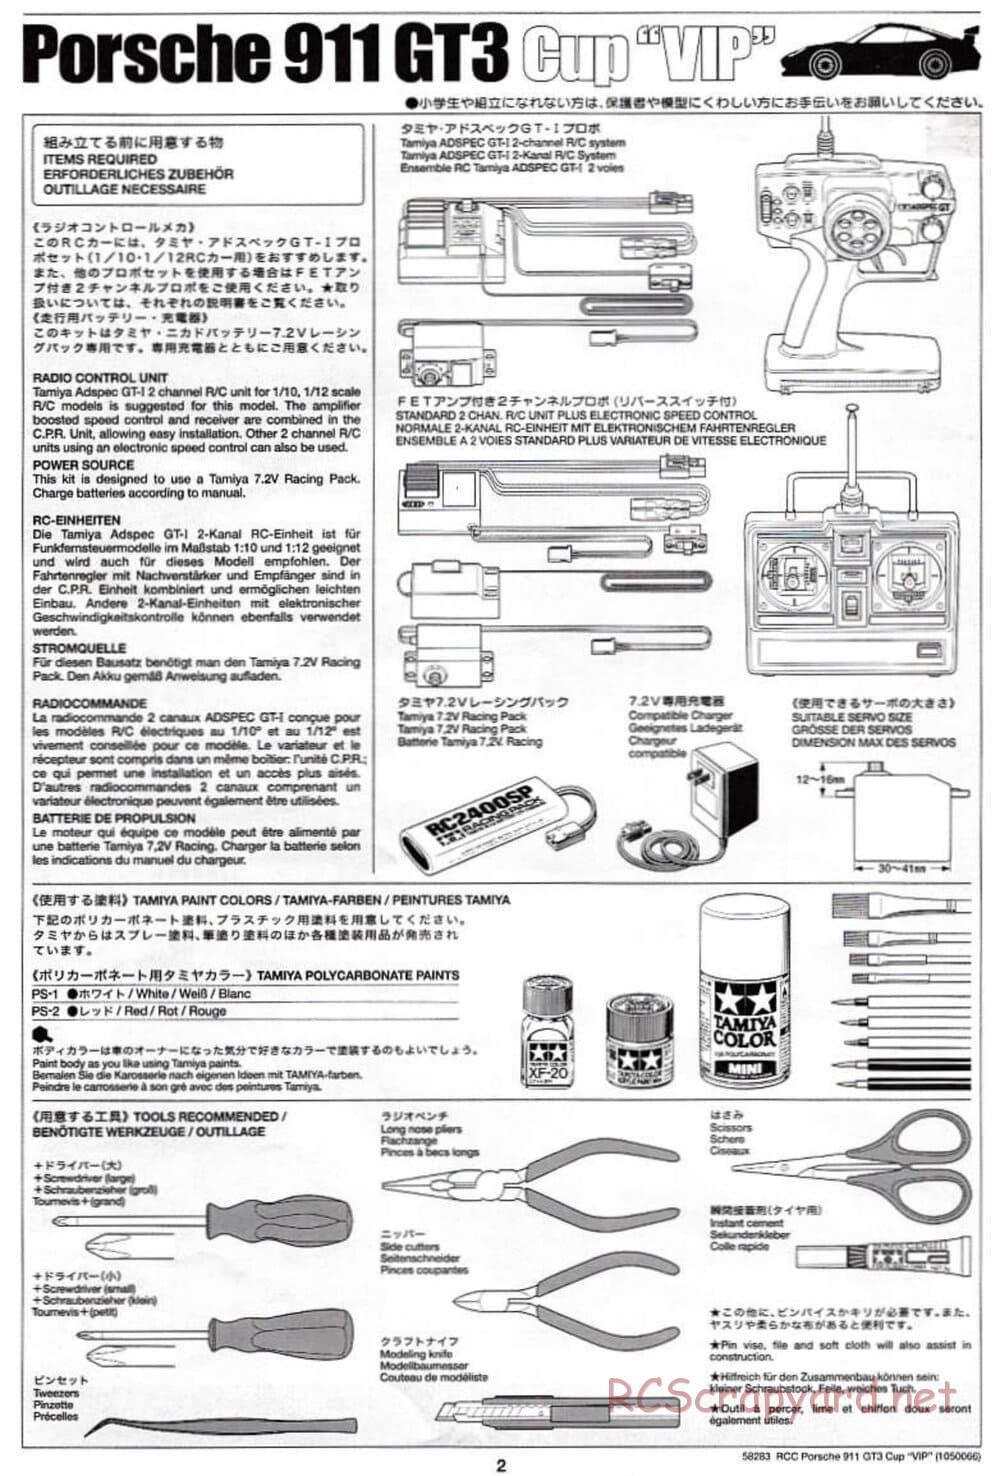 Tamiya - Porsche 911 GT3 Cup VIP - TL-01 Chassis - Manual - Page 2